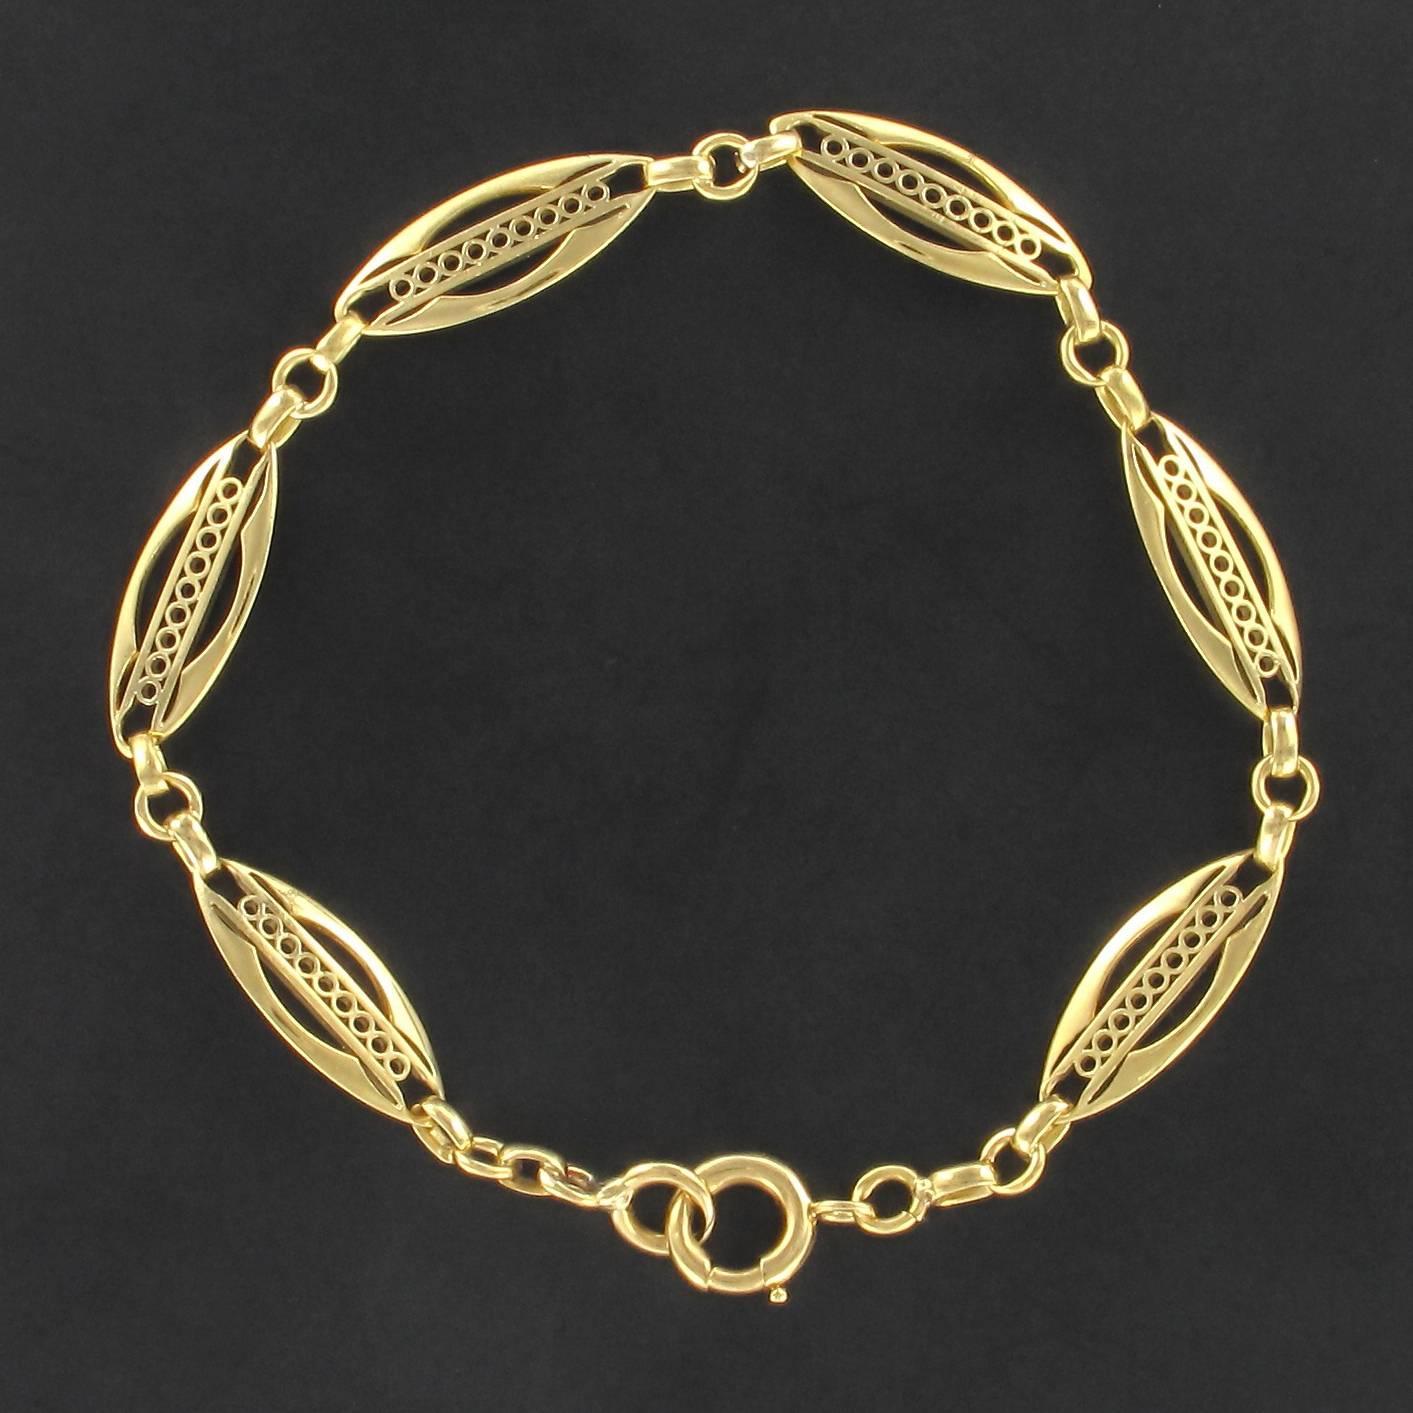 Bracelet in 18 carat yellow gold, head of eagle hallmark.

This lovely antique bracelet is made up of 6 openworked oblong links separated from each other by a gold ring. The clasp is a spring ring.

Length: 19.7 cm, width to the widest: 7.2